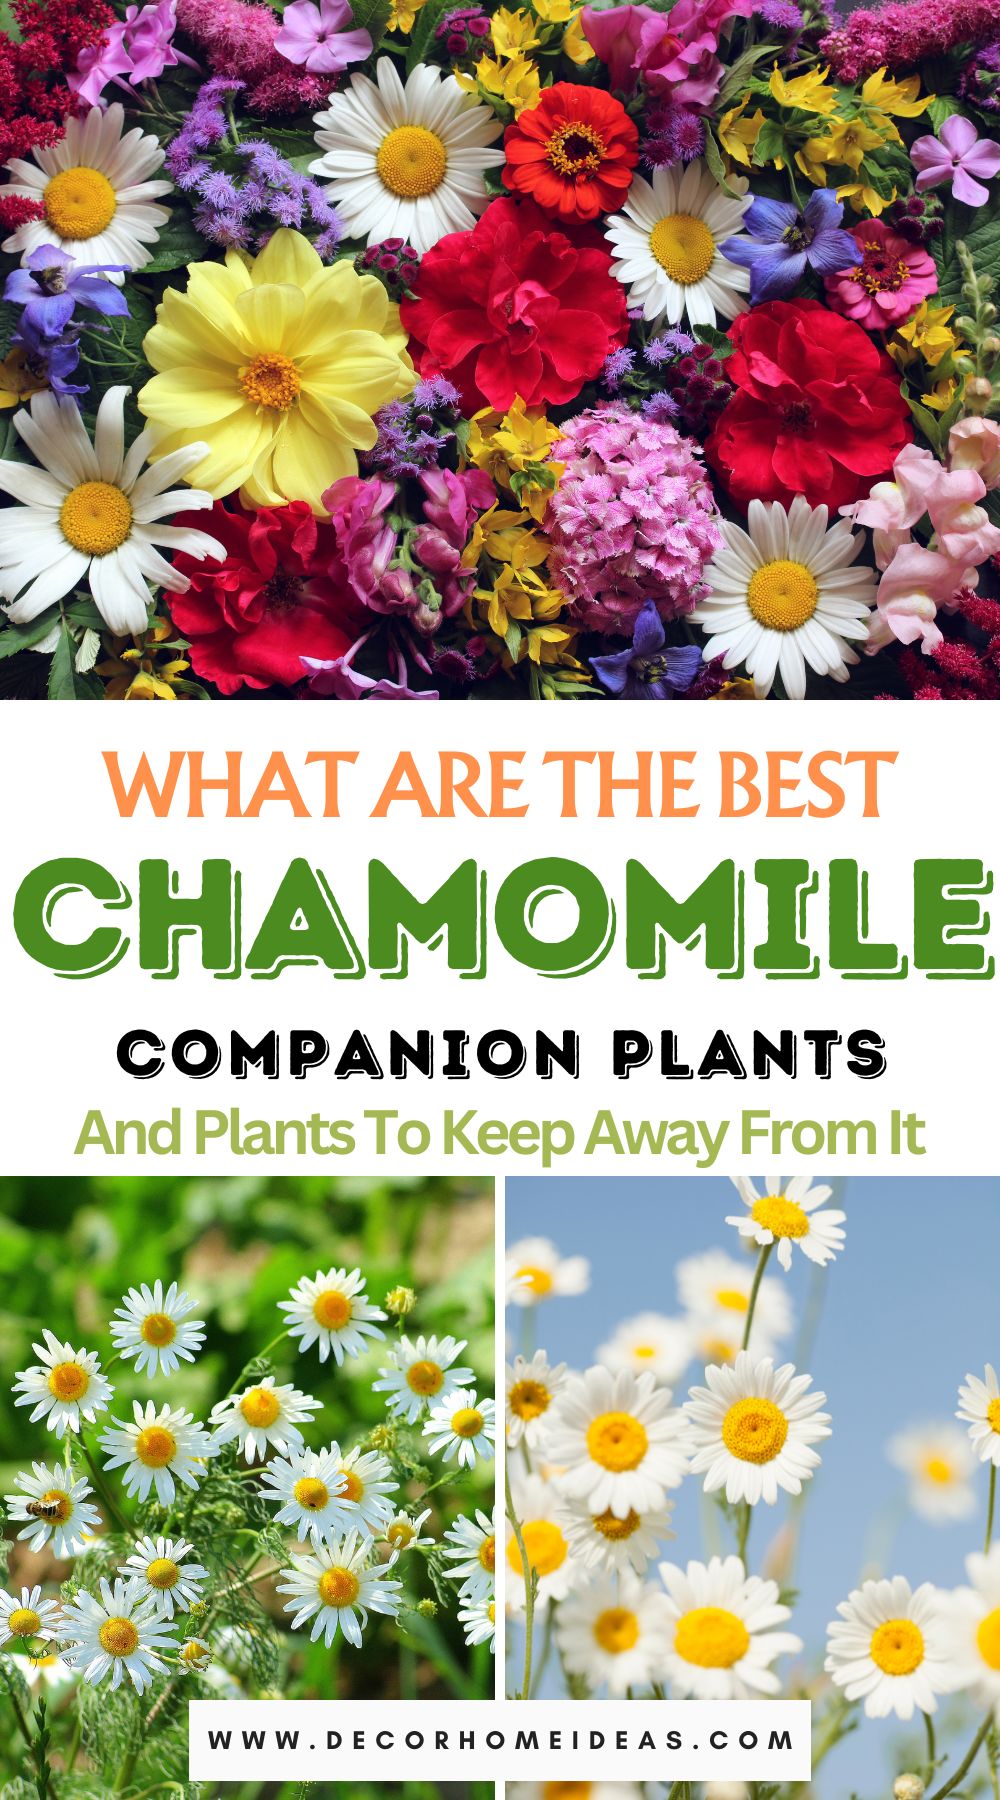 Discover the ideal companions for chamomile and learn which plants to keep at bay in your garden. Explore the perfect plant pairings and strategies for a thriving chamomile garden with our comprehensive guide.